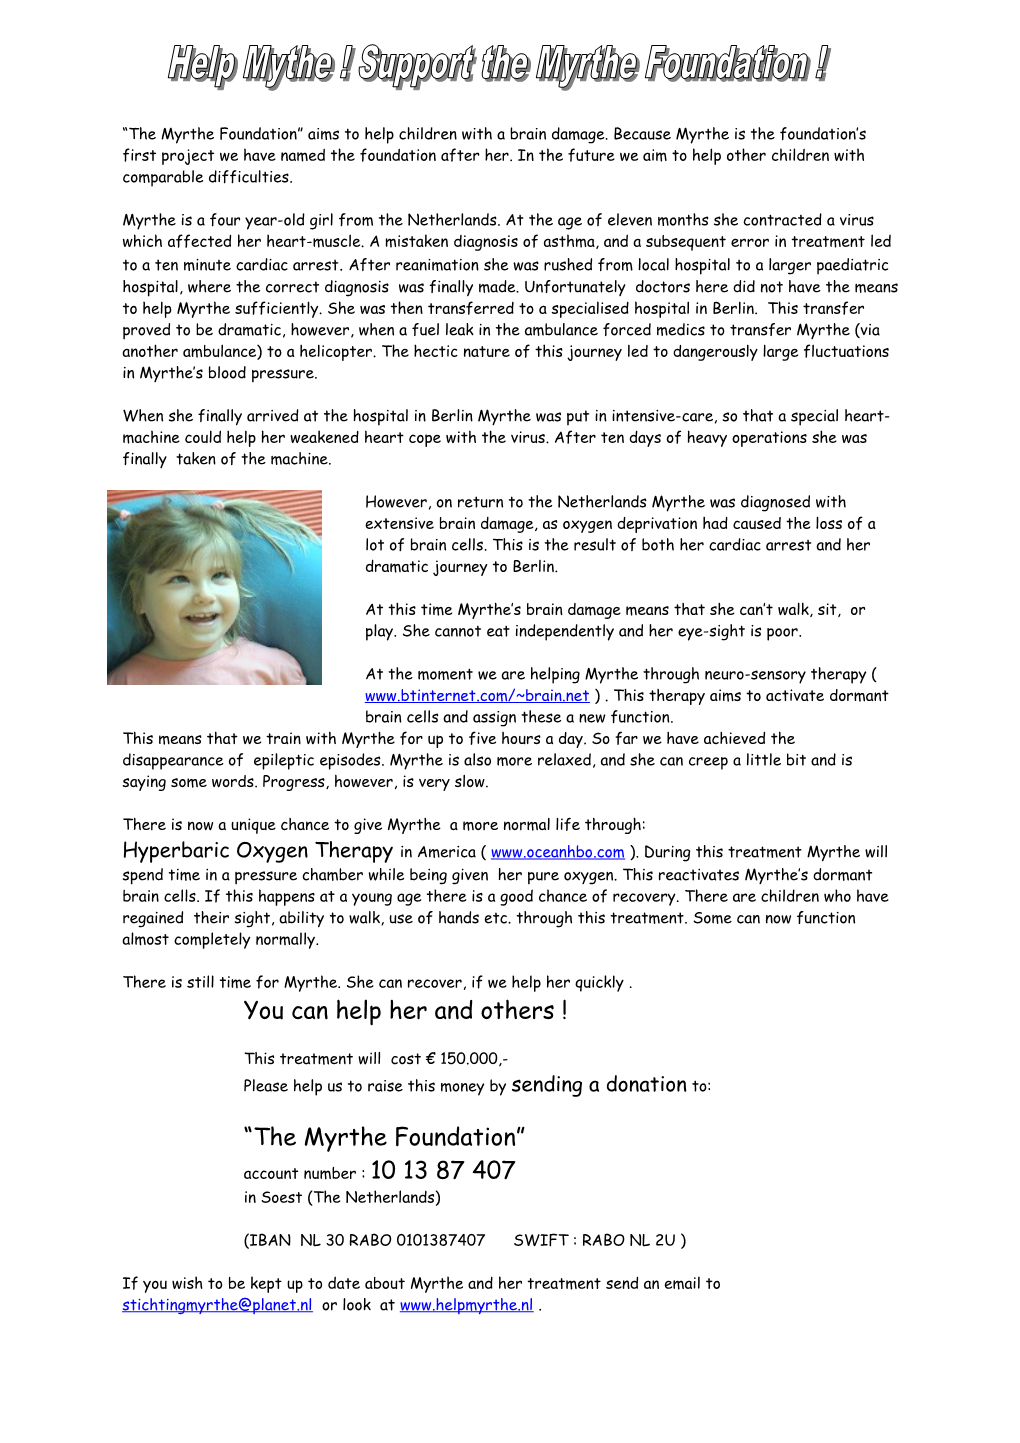 The Myrthe Foundation Aims to Help Children with a Brain Damage